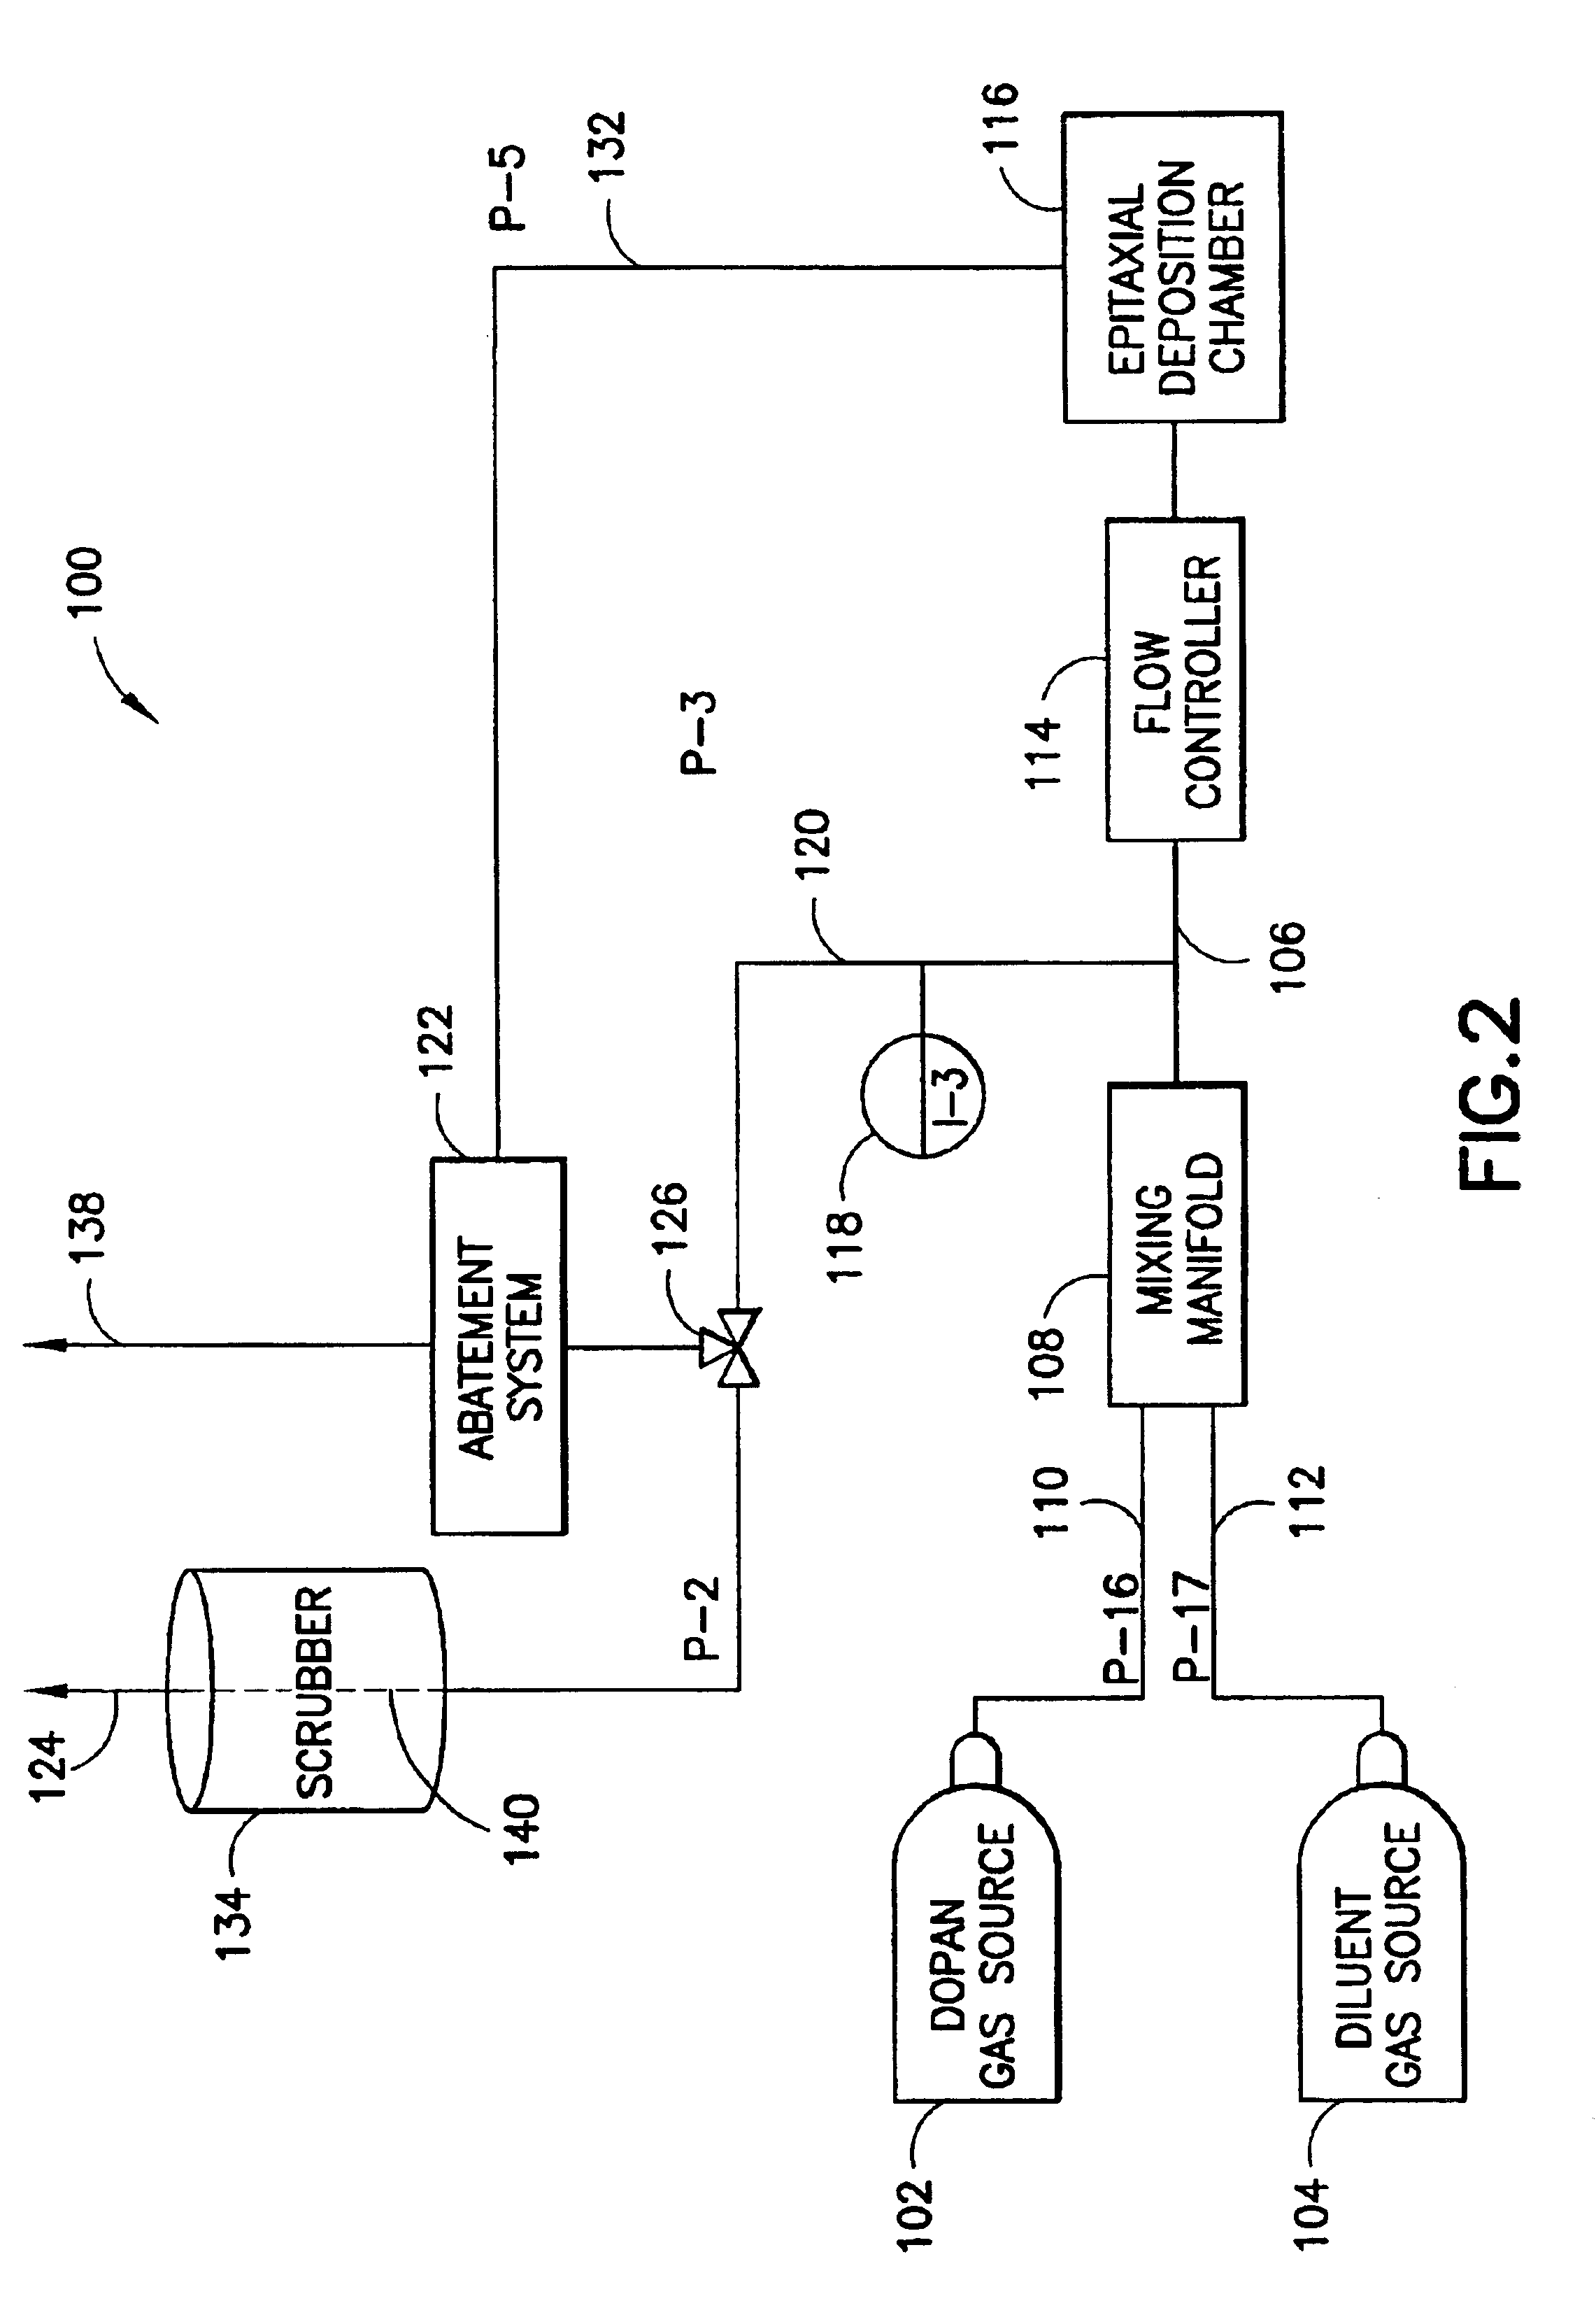 Abatement system targeting a by-pass effluent stream of a semiconductor process tool